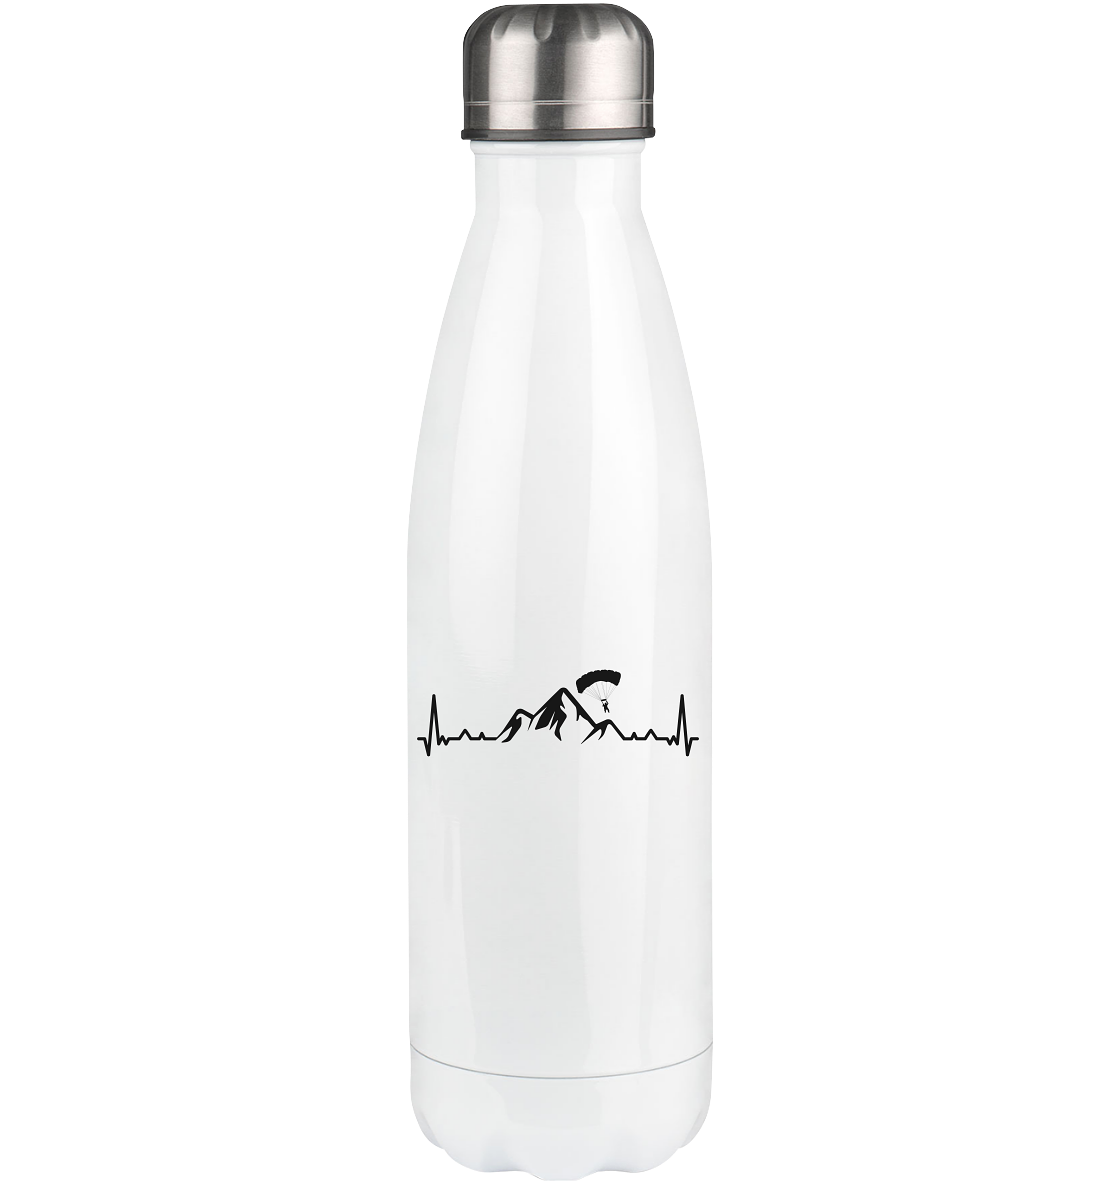 Heartbeat Mountain and Paragliding - Edelstahl Thermosflasche berge 500ml